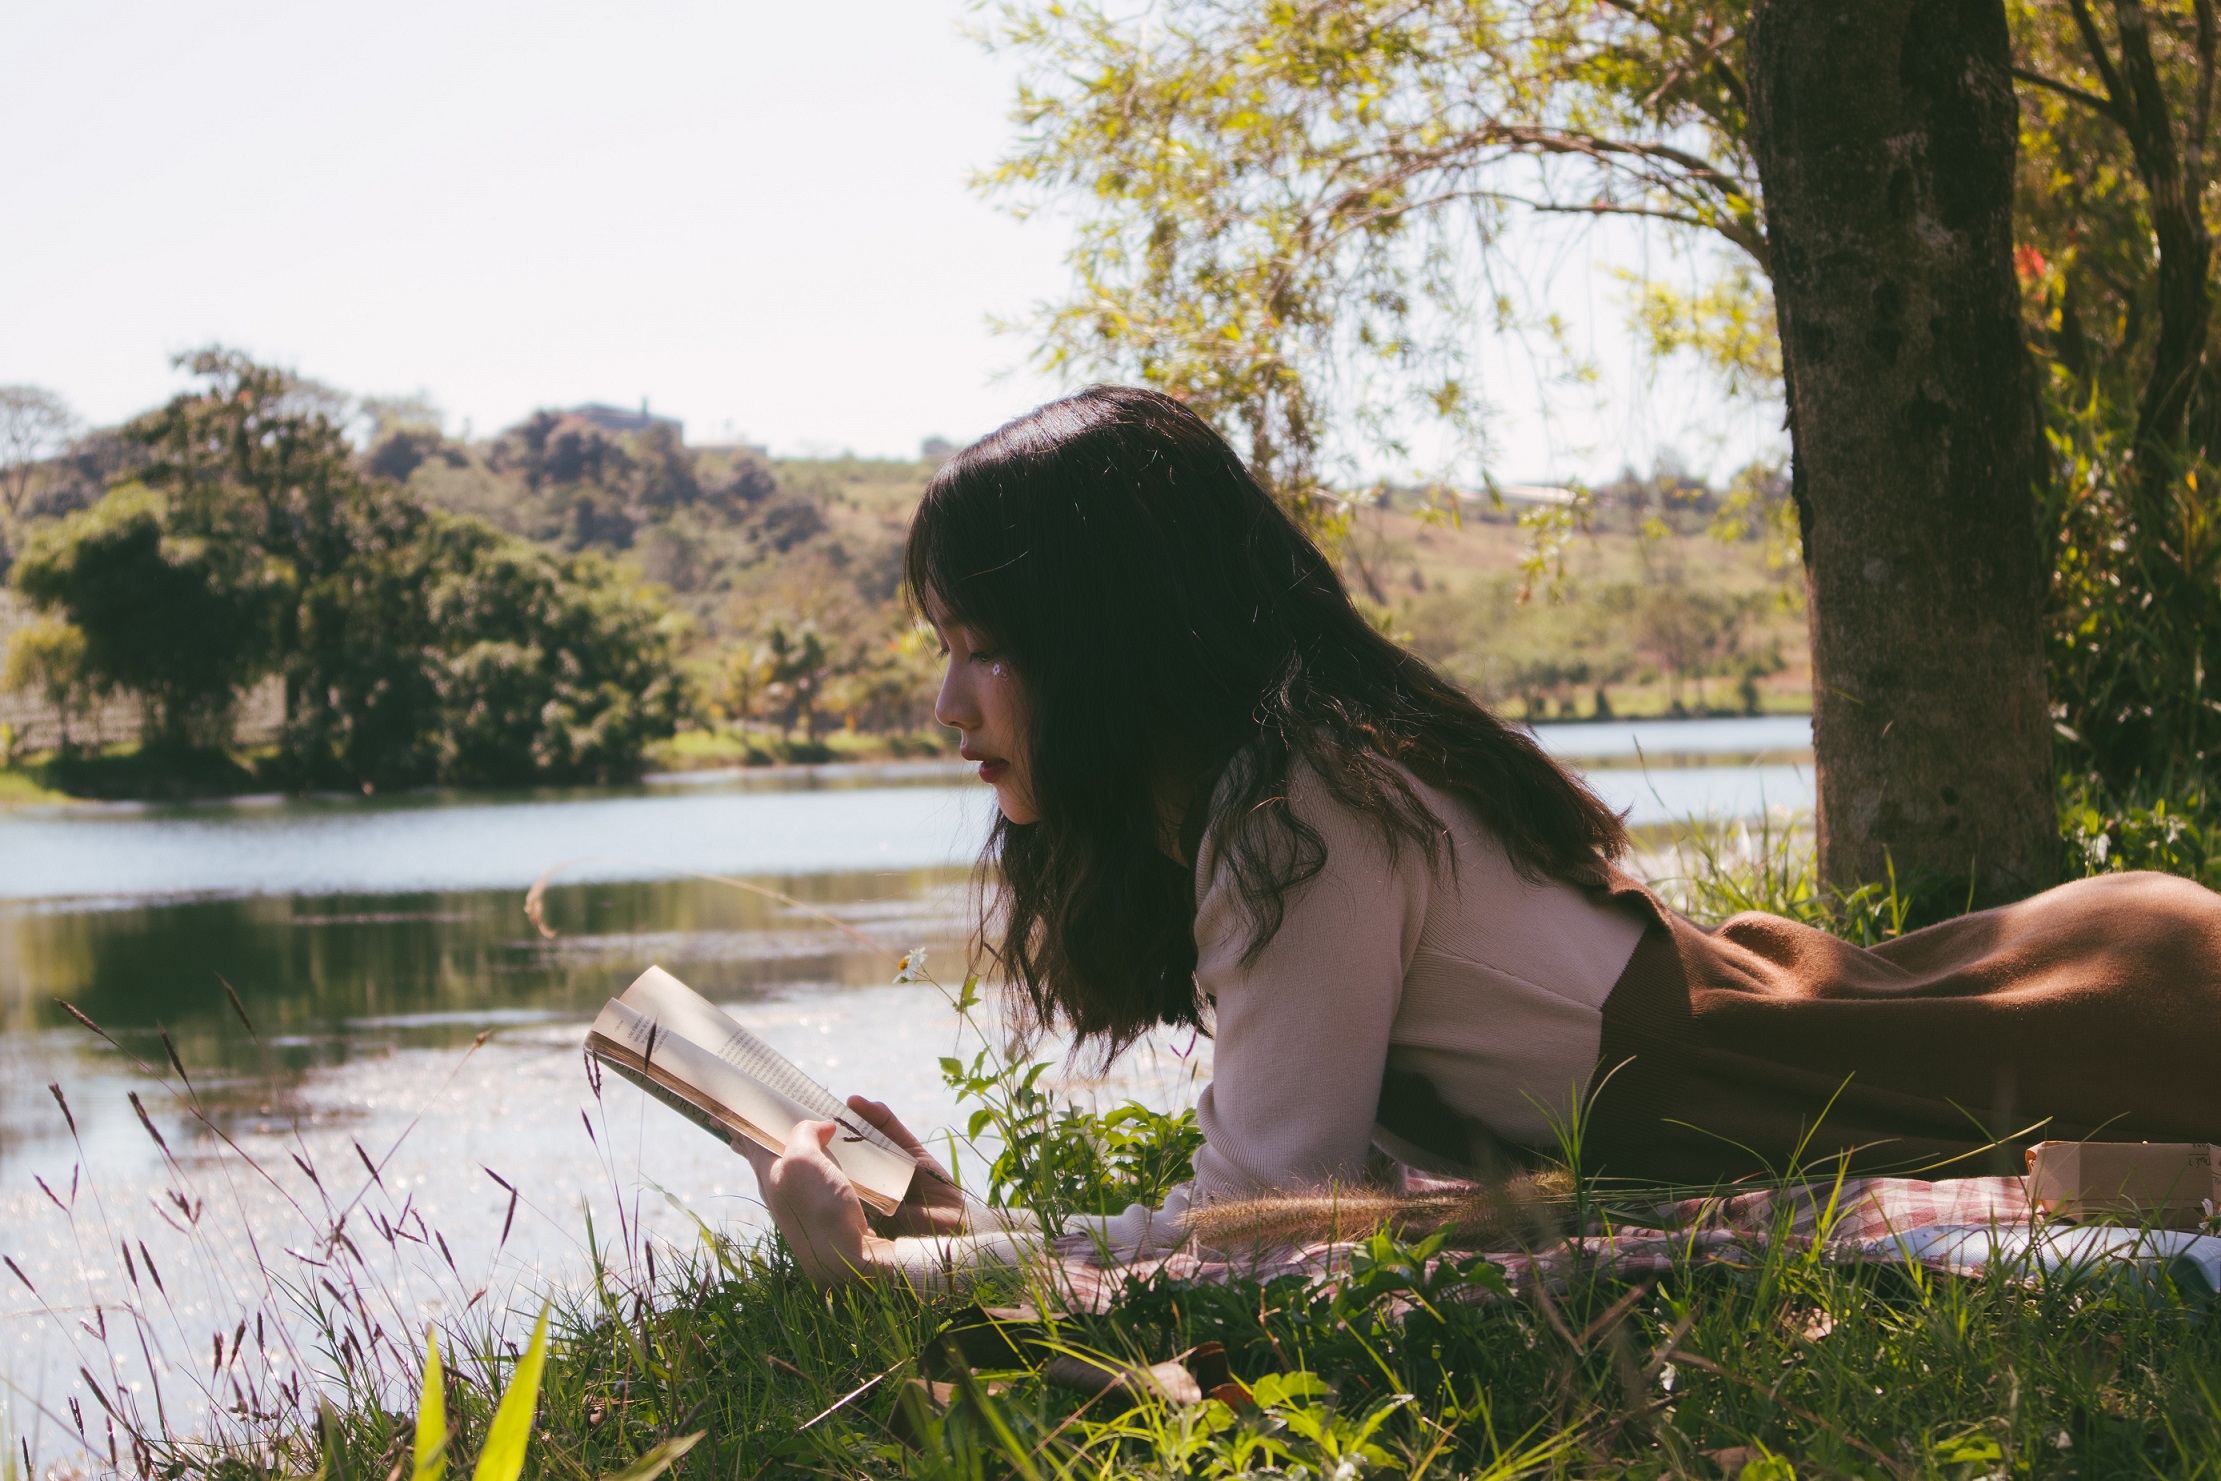 Woman reading by a river. Photo by Nguyen Thu Hoai on Unsplash.